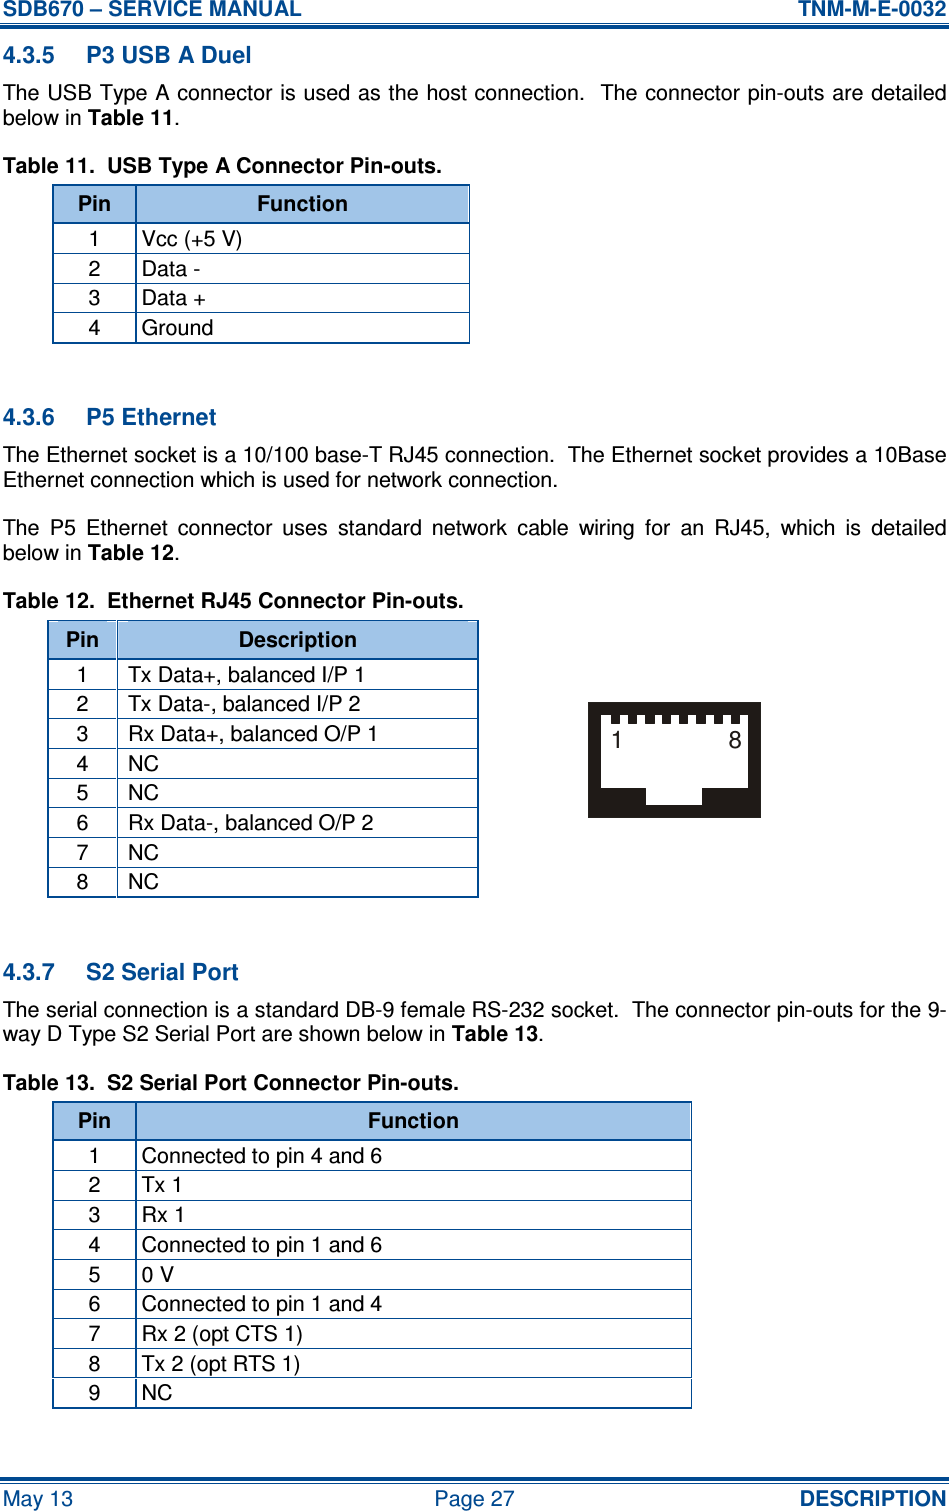 SDB670 – SERVICE MANUAL  TNM-M-E-0032 May 13  Page 27  DESCRIPTION 4.3.5  P3 USB A Duel The USB Type A connector is used as the host connection.  The connector pin-outs are detailed below in Table 11. Table 11.  USB Type A Connector Pin-outs. Pin  Function 1  Vcc (+5 V) 2  Data - 3  Data + 4  Ground  4.3.6  P5 Ethernet The Ethernet socket is a 10/100 base-T RJ45 connection.  The Ethernet socket provides a 10Base Ethernet connection which is used for network connection. The  P5  Ethernet  connector  uses  standard  network  cable  wiring  for  an  RJ45,  which  is  detailed below in Table 12. Table 12.  Ethernet RJ45 Connector Pin-outs. Pin  Description 1  Tx Data+, balanced I/P 1 2  Tx Data-, balanced I/P 2 3  Rx Data+, balanced O/P 1 4  NC 5  NC 6  Rx Data-, balanced O/P 2 7  NC 8  NC  4.3.7  S2 Serial Port The serial connection is a standard DB-9 female RS-232 socket.  The connector pin-outs for the 9-way D Type S2 Serial Port are shown below in Table 13. Table 13.  S2 Serial Port Connector Pin-outs. Pin  Function 1  Connected to pin 4 and 6 2  Tx 1 3  Rx 1 4  Connected to pin 1 and 6 5  0 V 6  Connected to pin 1 and 4 7  Rx 2 (opt CTS 1) 8  Tx 2 (opt RTS 1) 9  NC  18